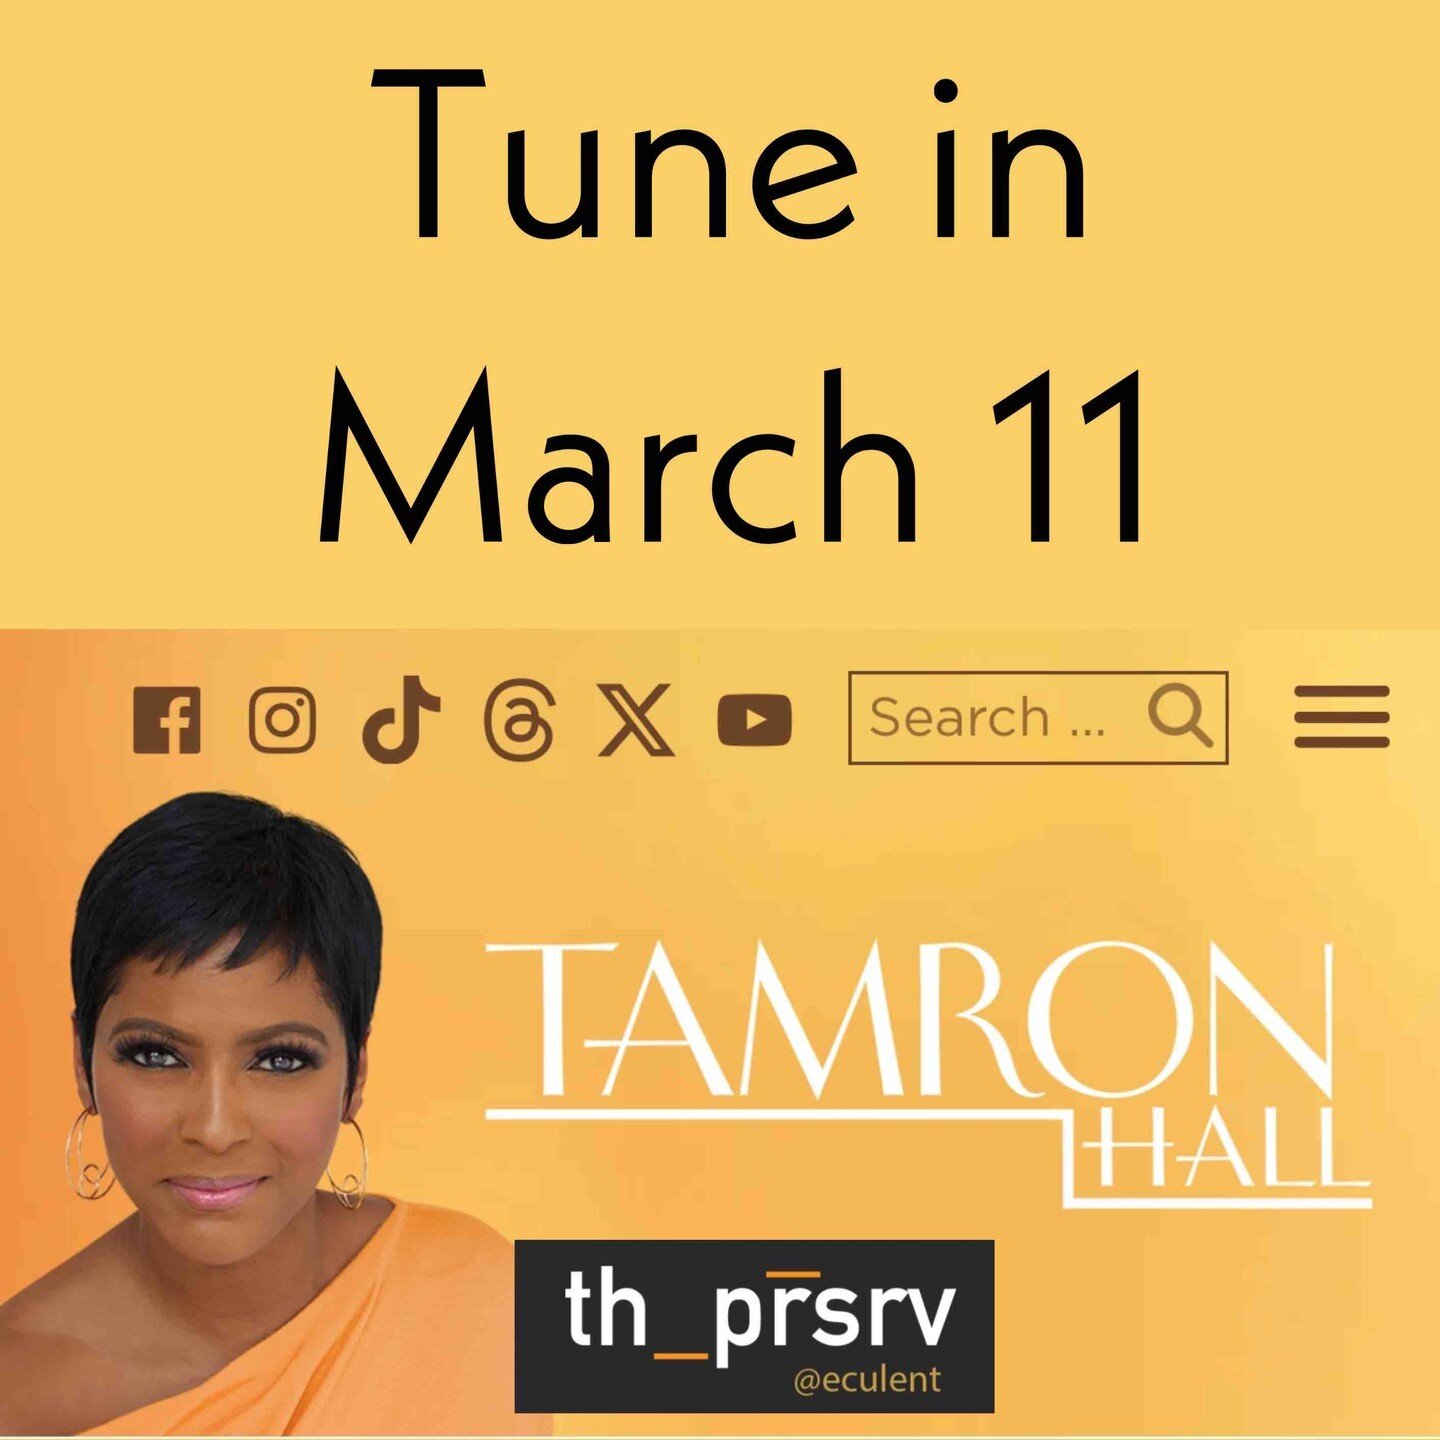 #ThPrsrv is excited to announce that you should set your #VCR for March 11 when the @tamronhallshow on #ABC will be giving us a #shoutout @thprsrv in #Kemah. Thanks so much team #Tamron ❤️❤️❤️ #HTXDining #HoustonFoodScene #IndigenousIngredients #Thai